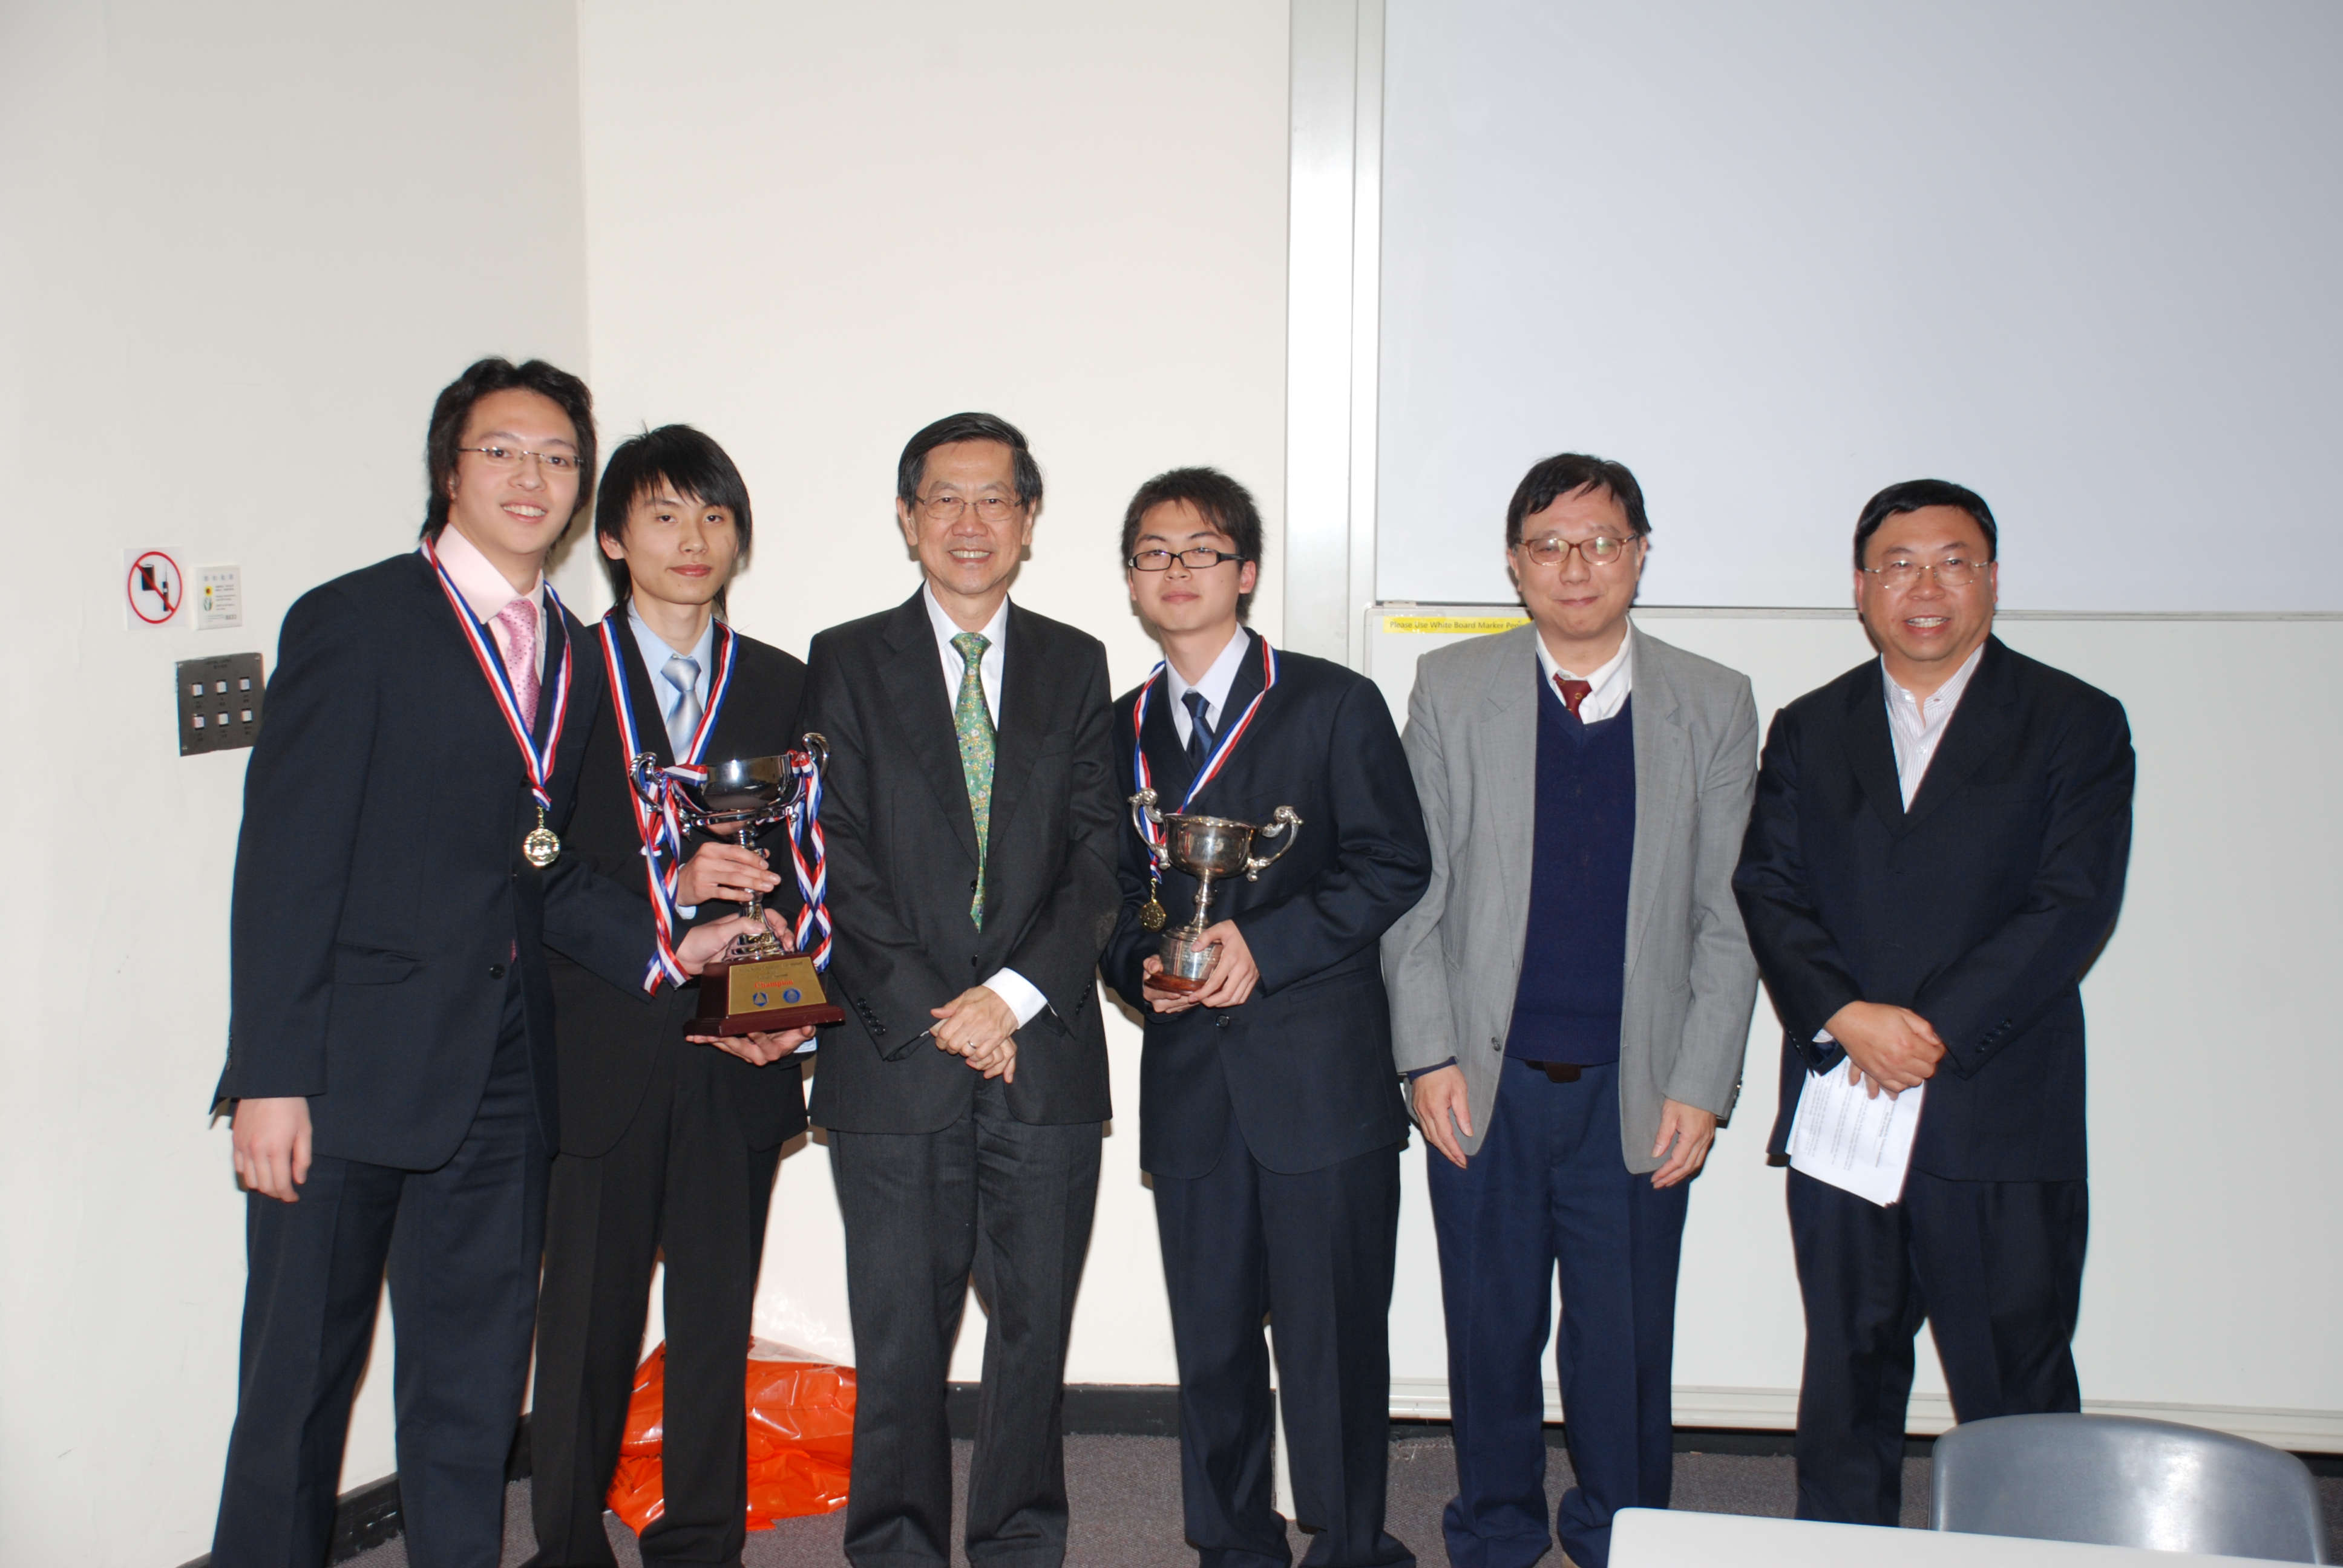 image 1: photo of CUHK chemistry are champions at the 19th Hong Kong Chemistry Olympiad